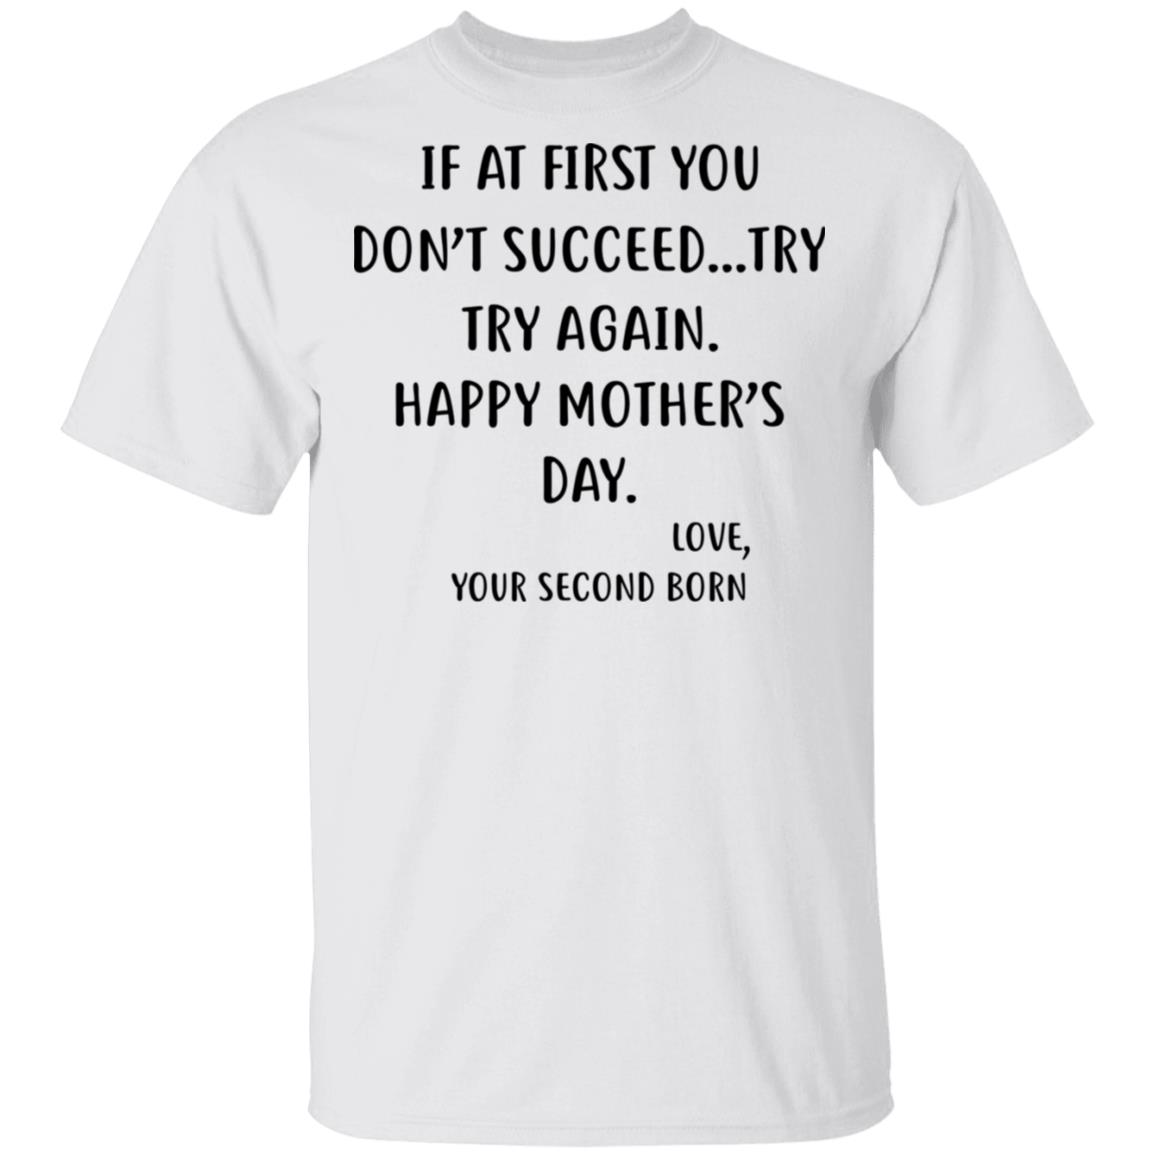 At First You Don’t Succeed Try, Try Again Happy Mother’s Day Love Your Second Born Funny